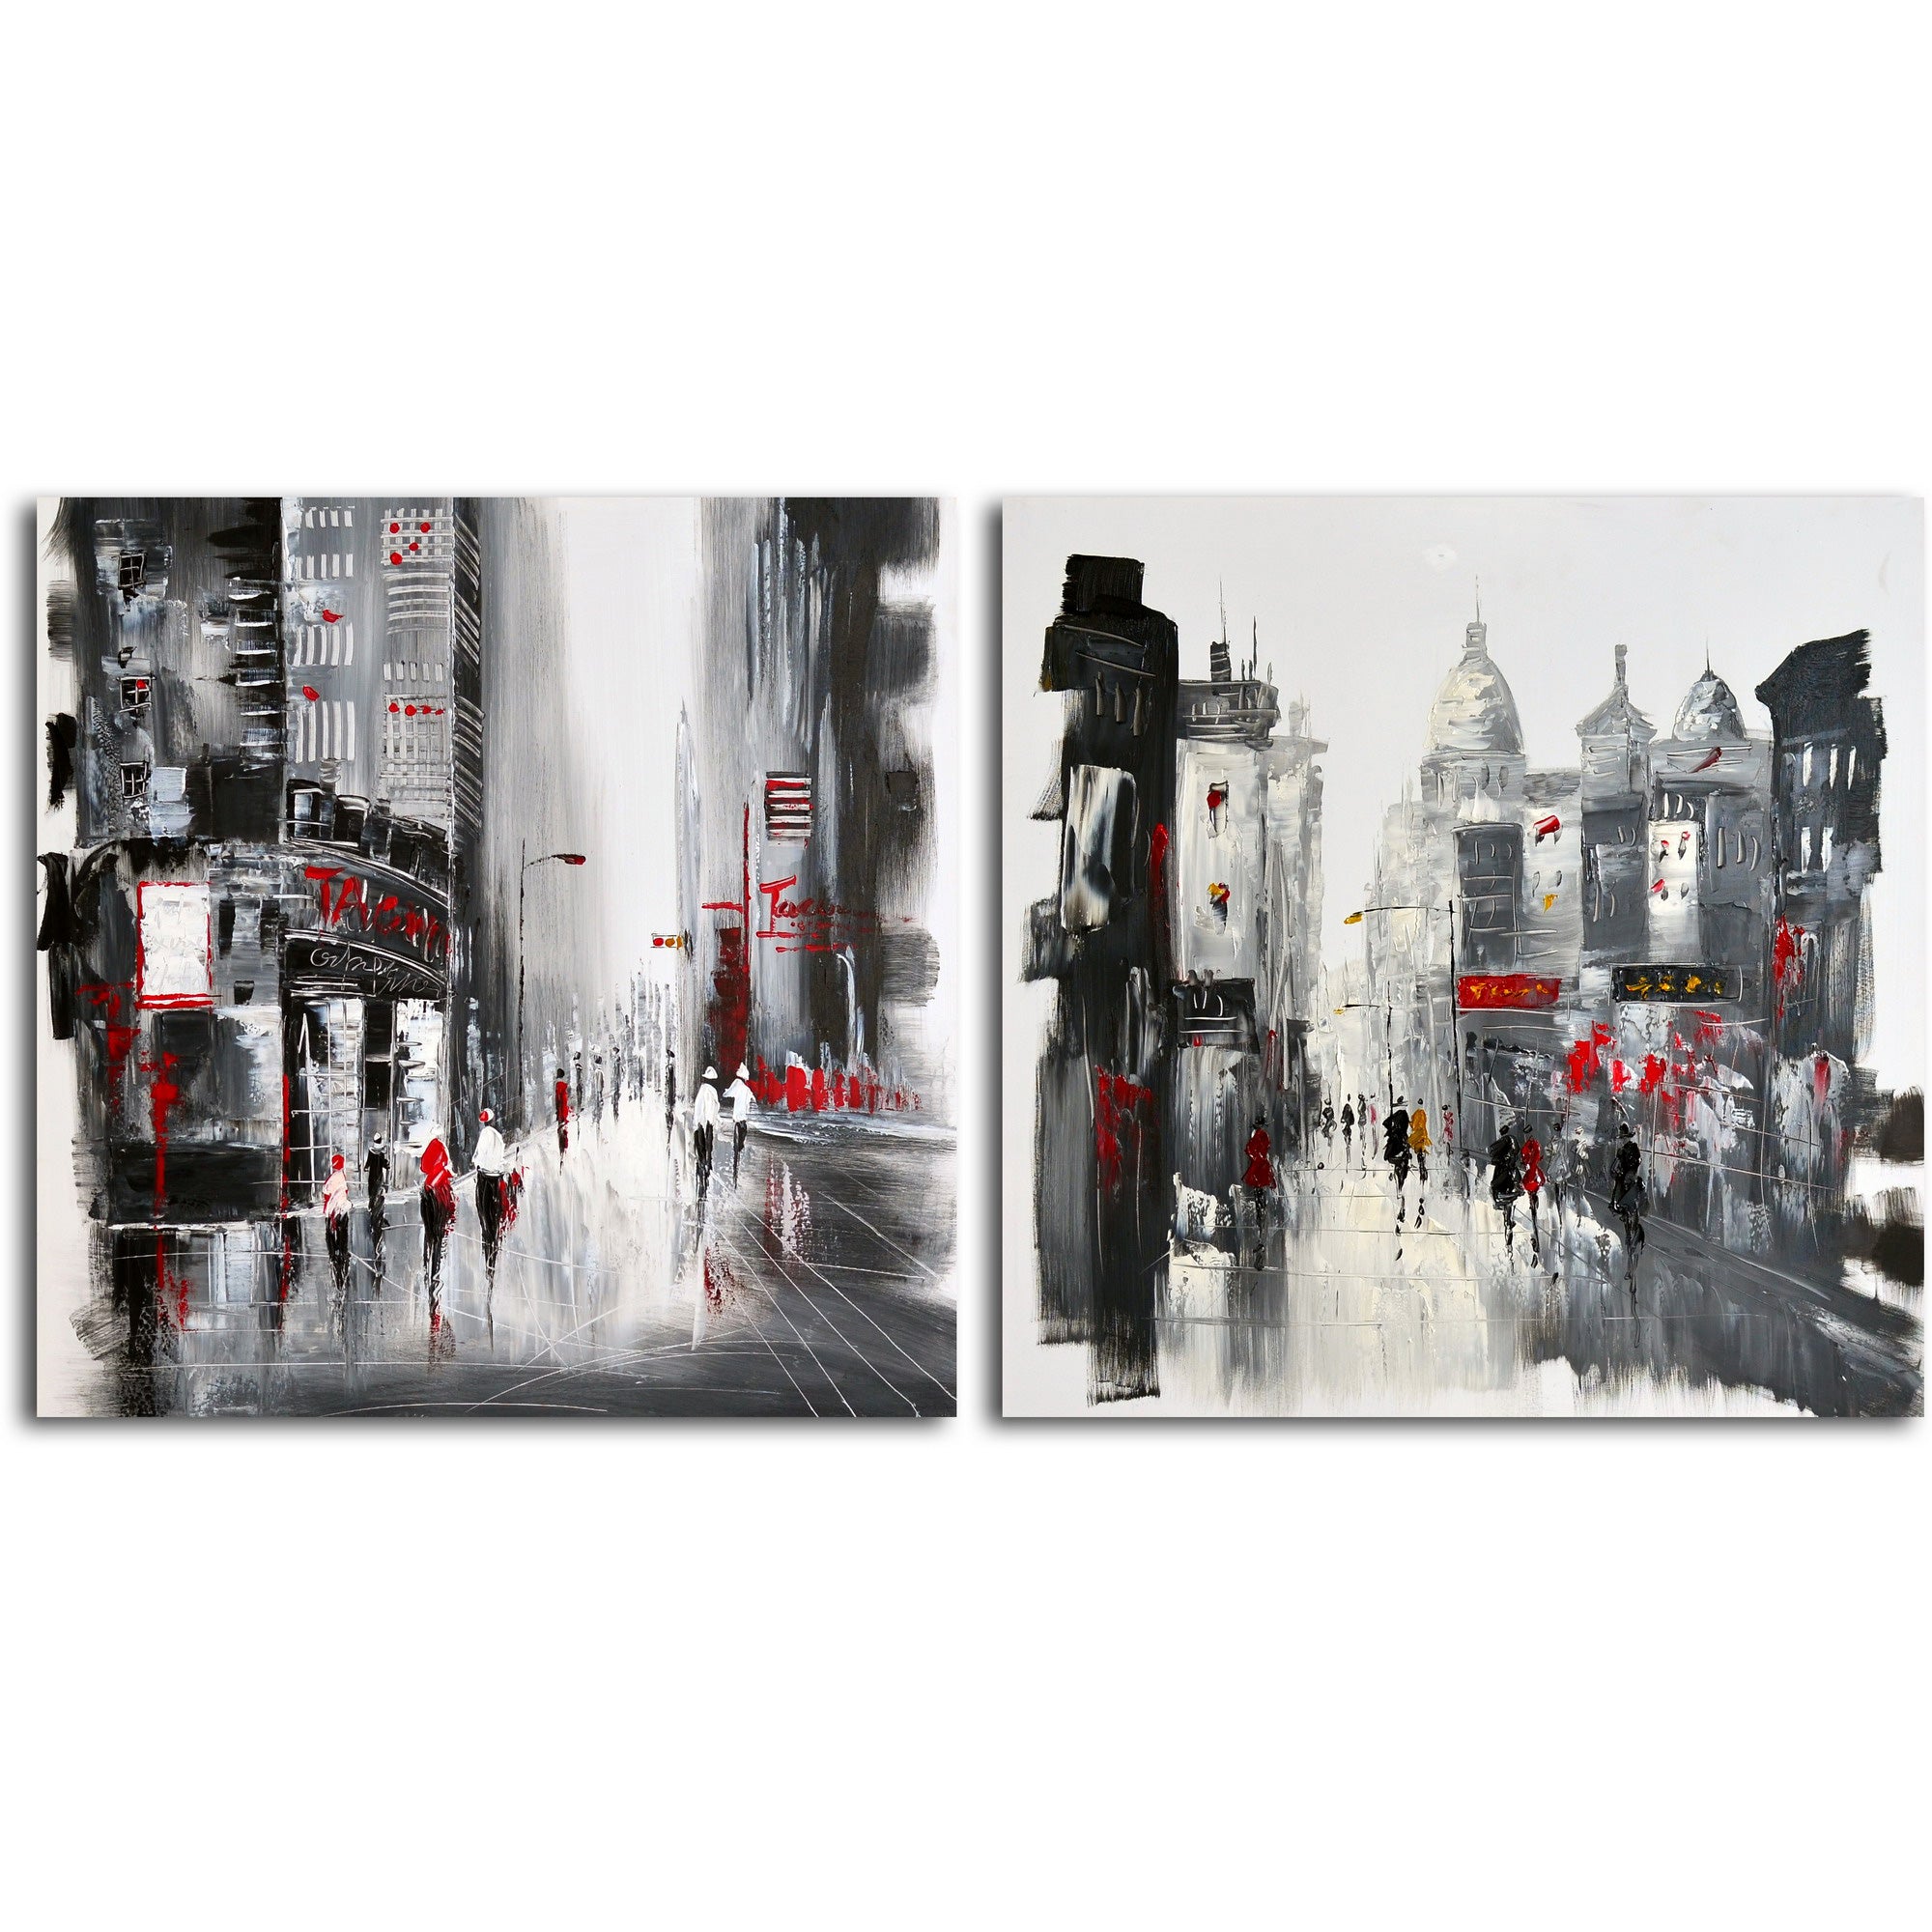 Hand painted "Two Sides of the Same City" 2 Piece Canvas Set